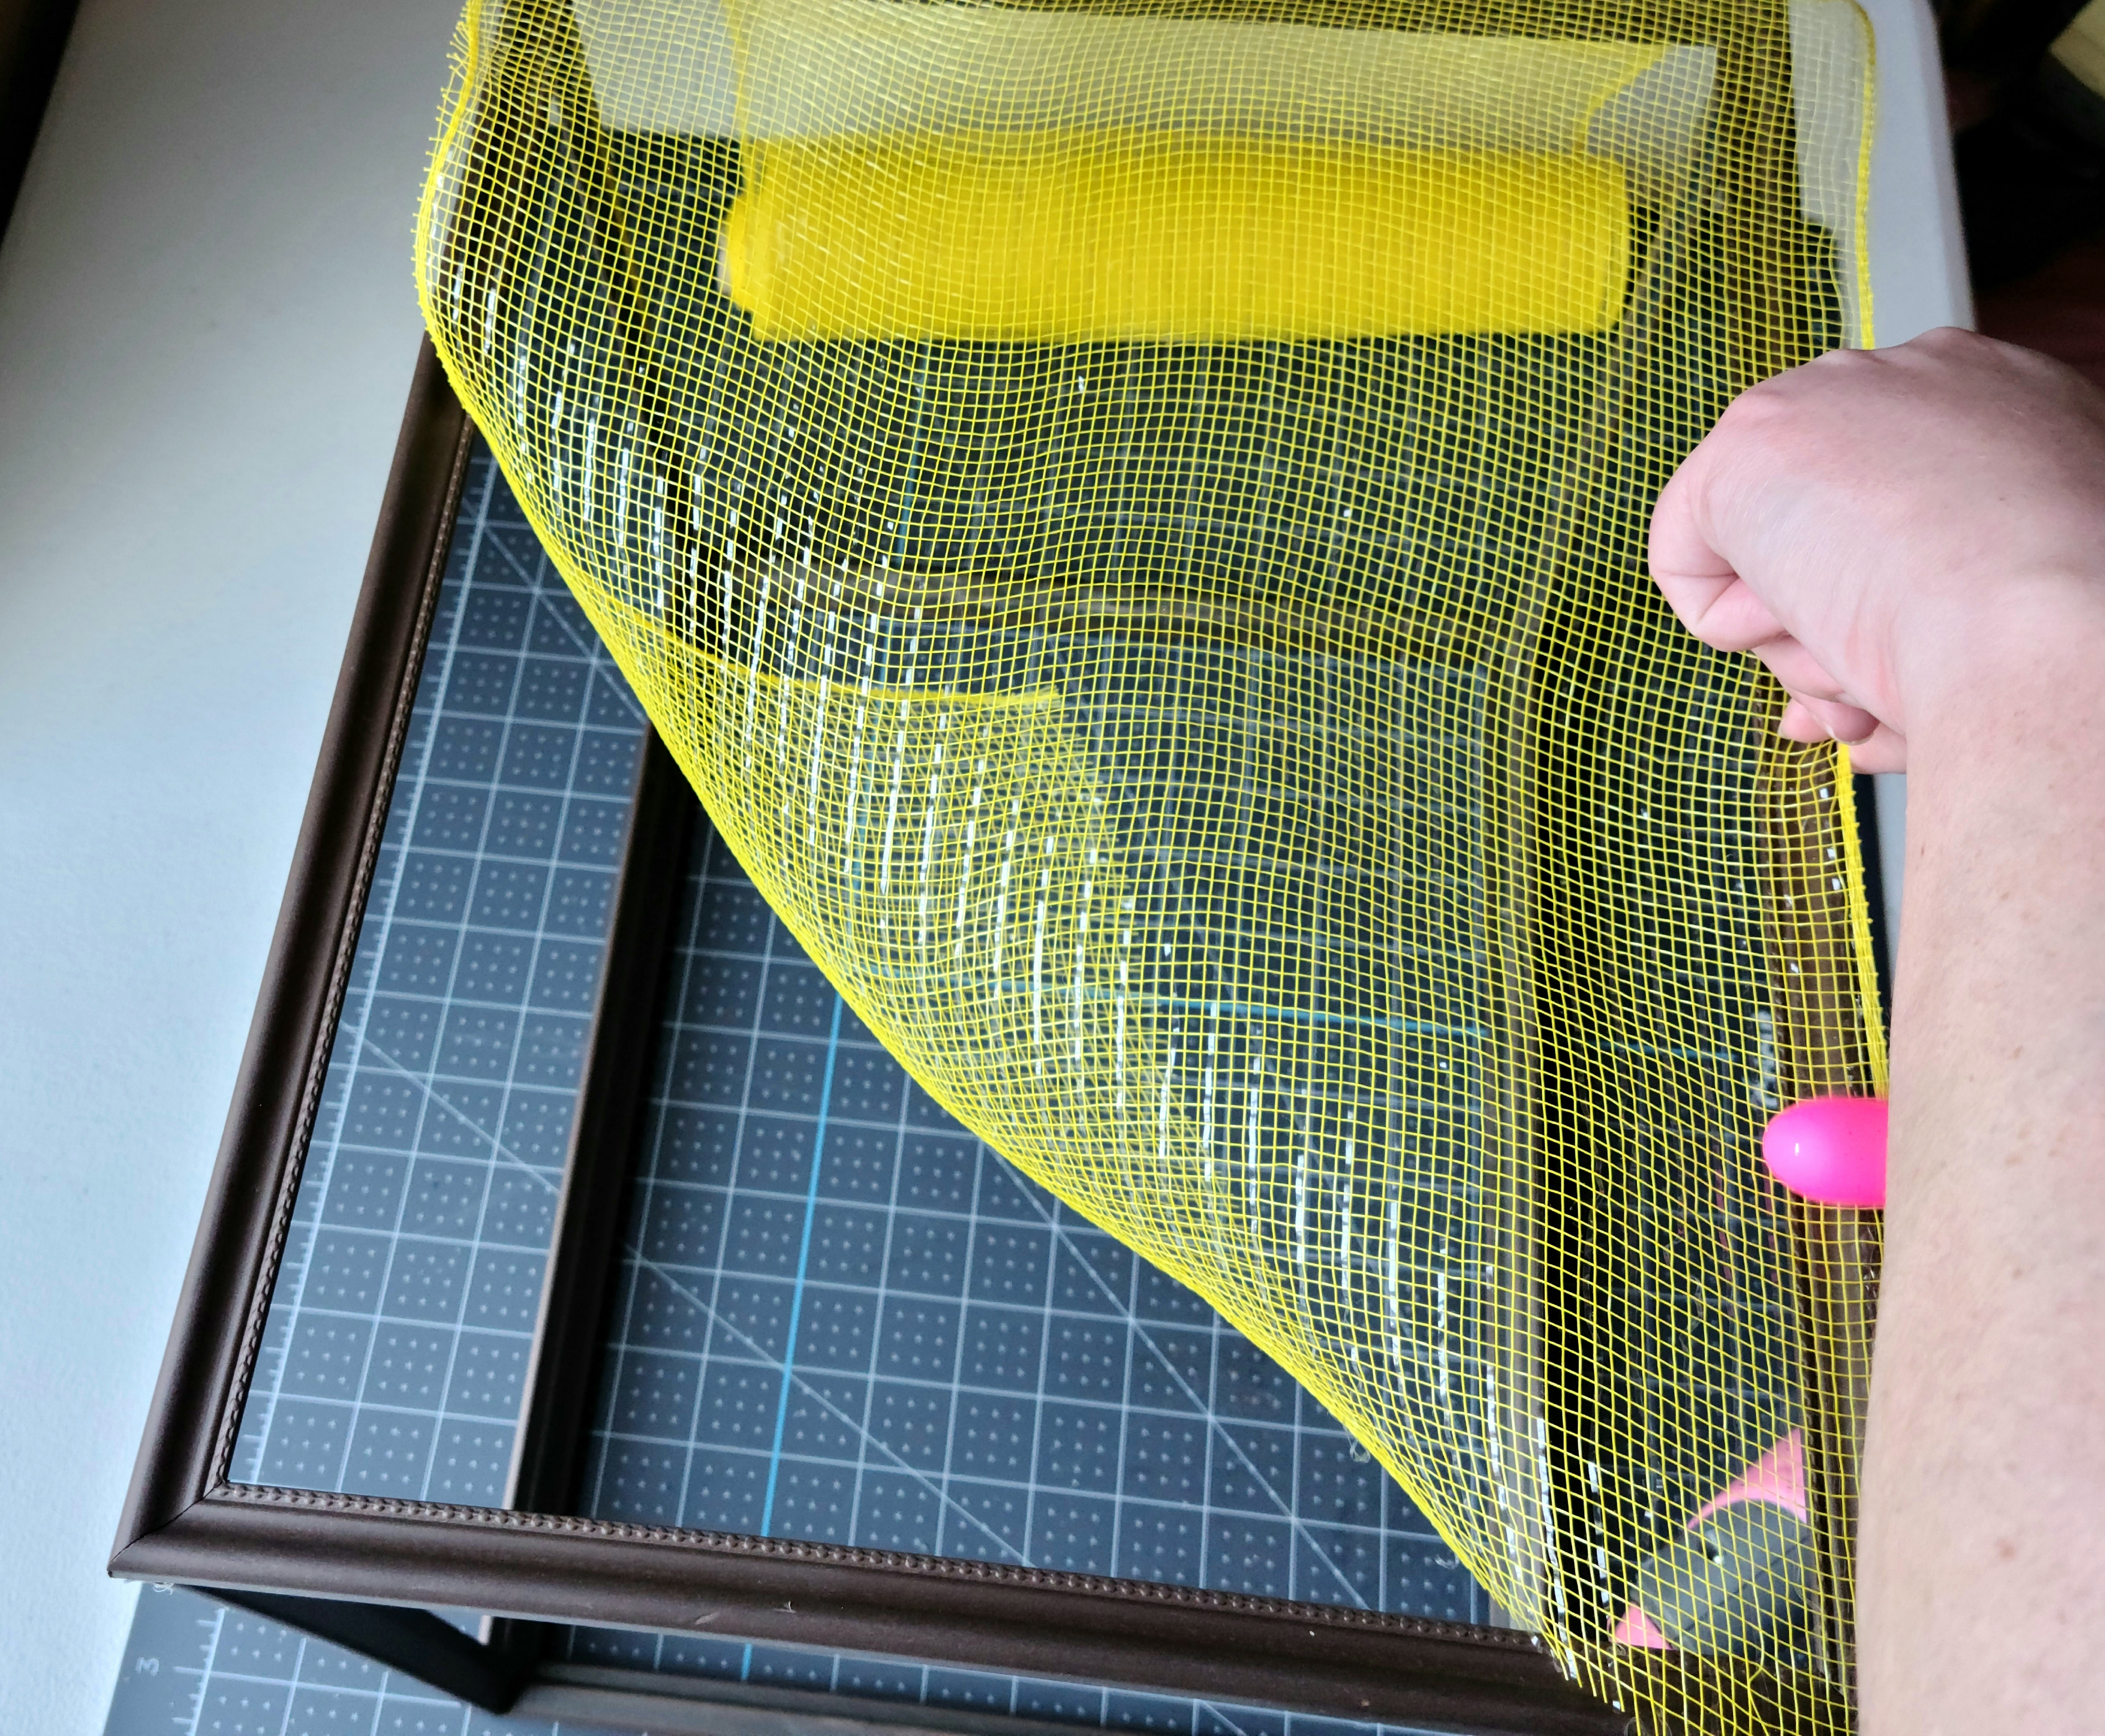 Pressing the deco mesh on the hot glue that was added on the frame of the DIY lighted gift box.